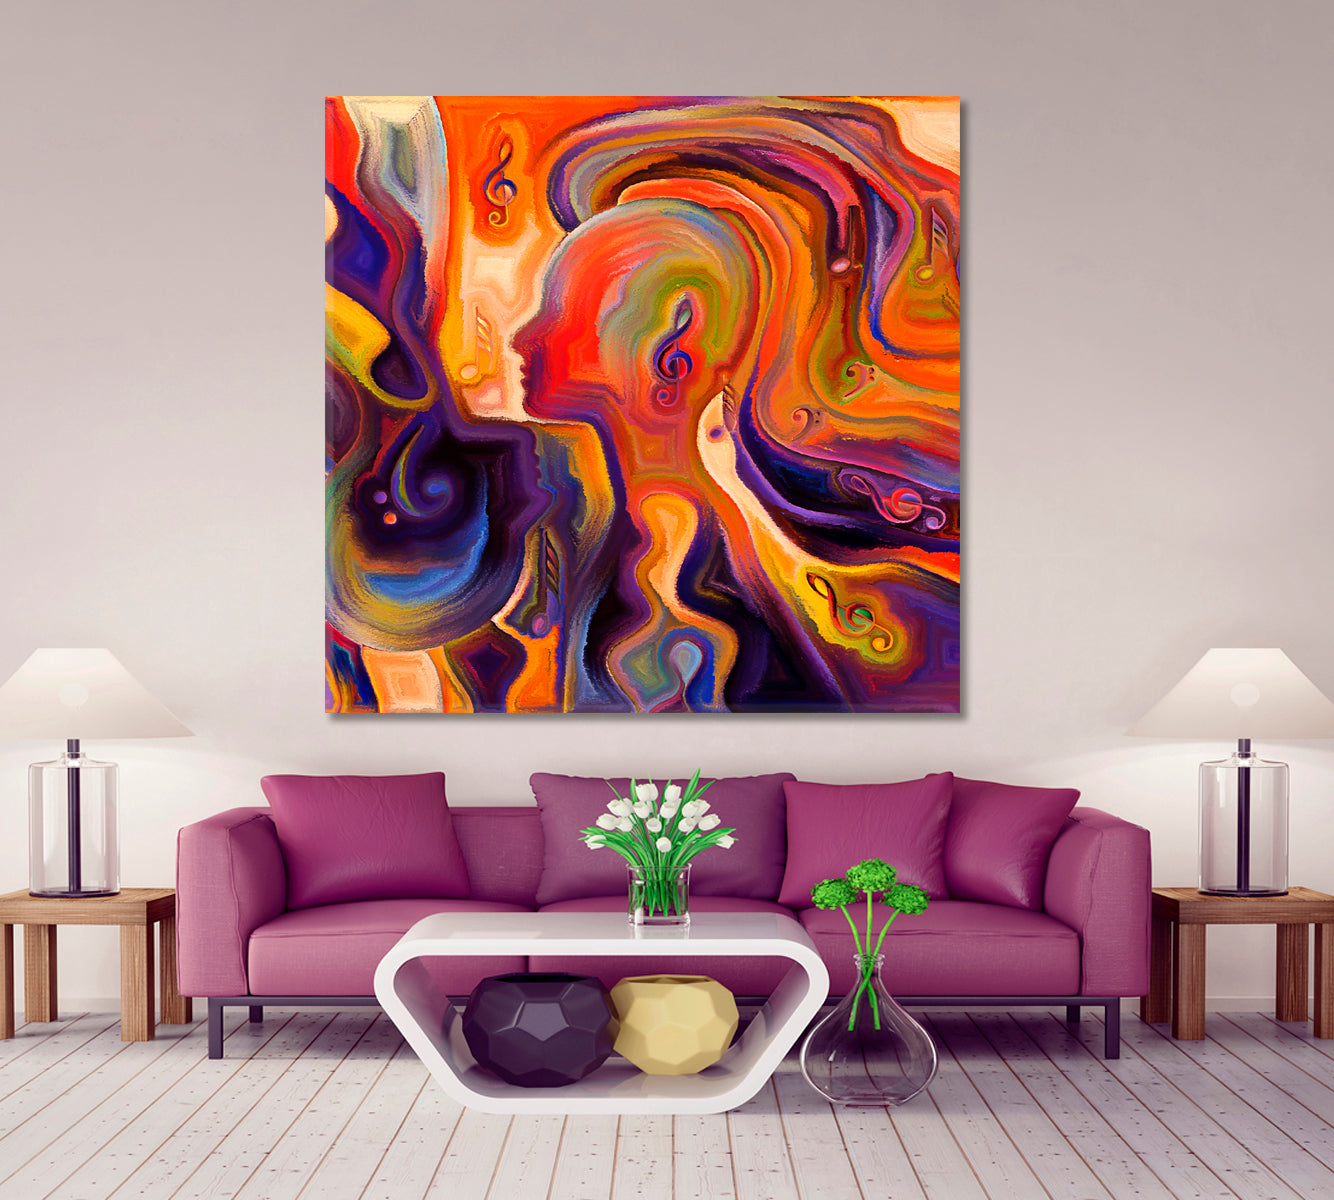 VIBRANT MODERN ART Inner Consciousness Vivid Coral and Purple - Square Panel Contemporary Art Artesty   